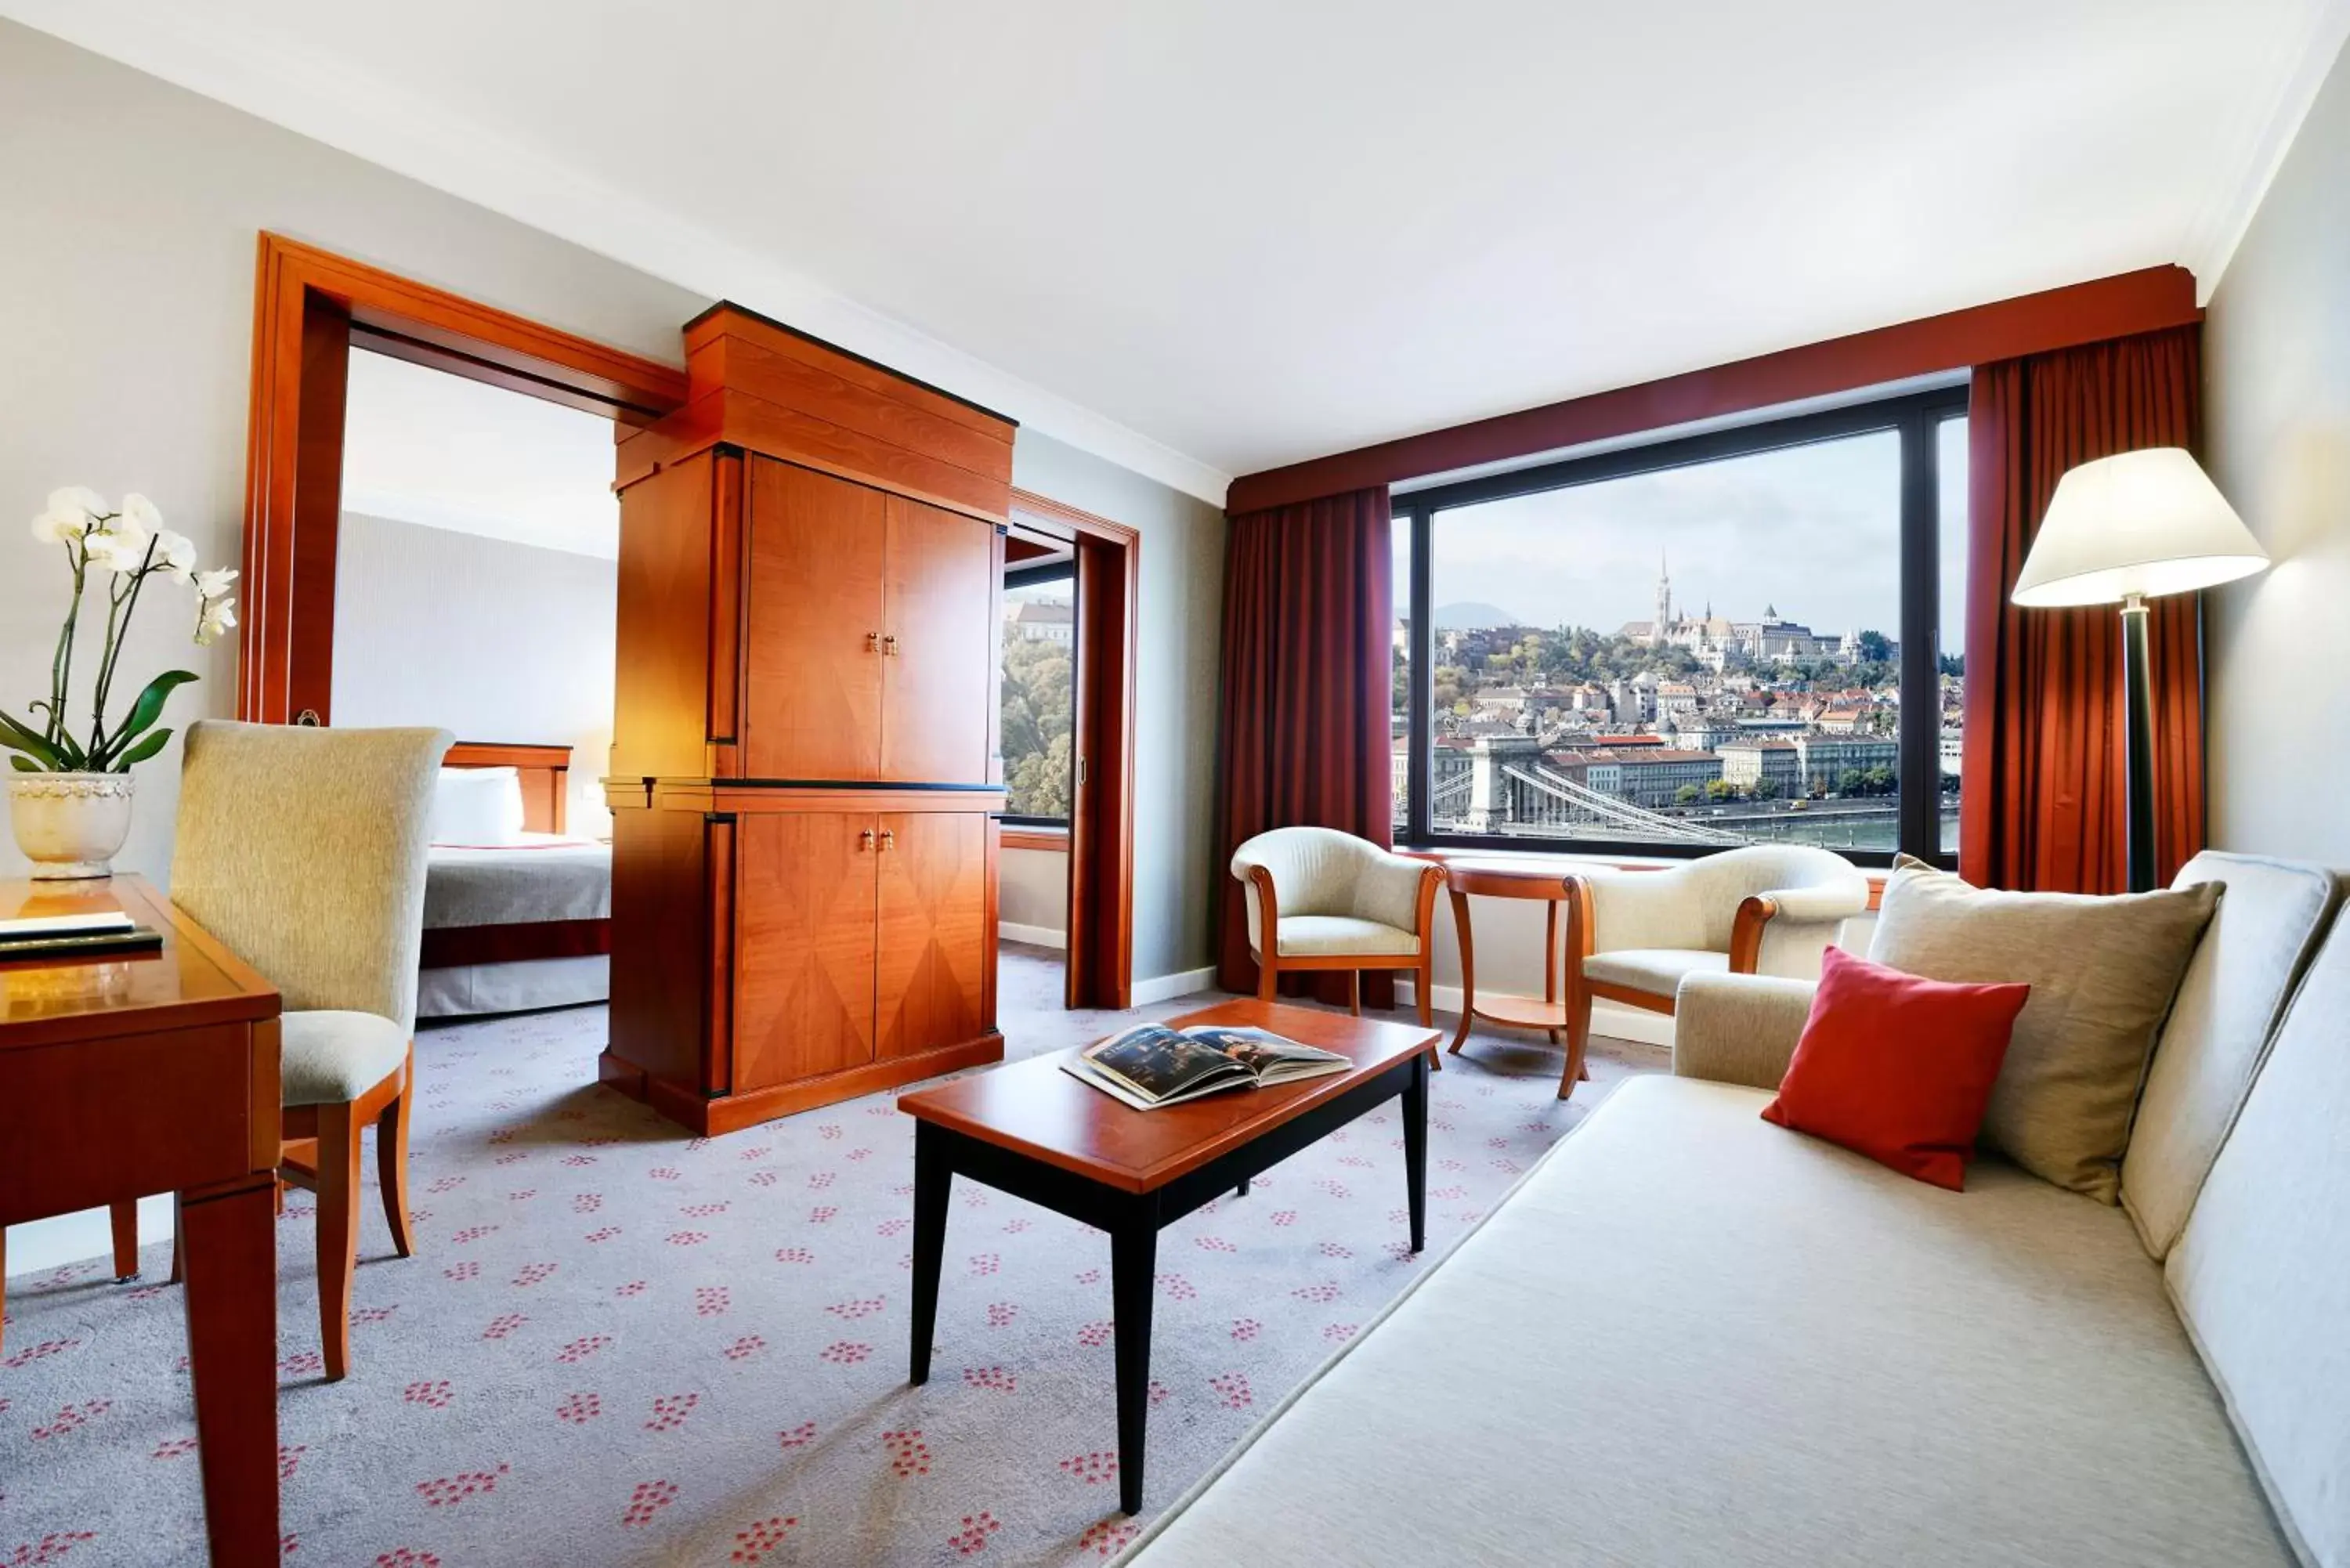 River view, Room Photo in InterContinental Budapest, an IHG Hotel